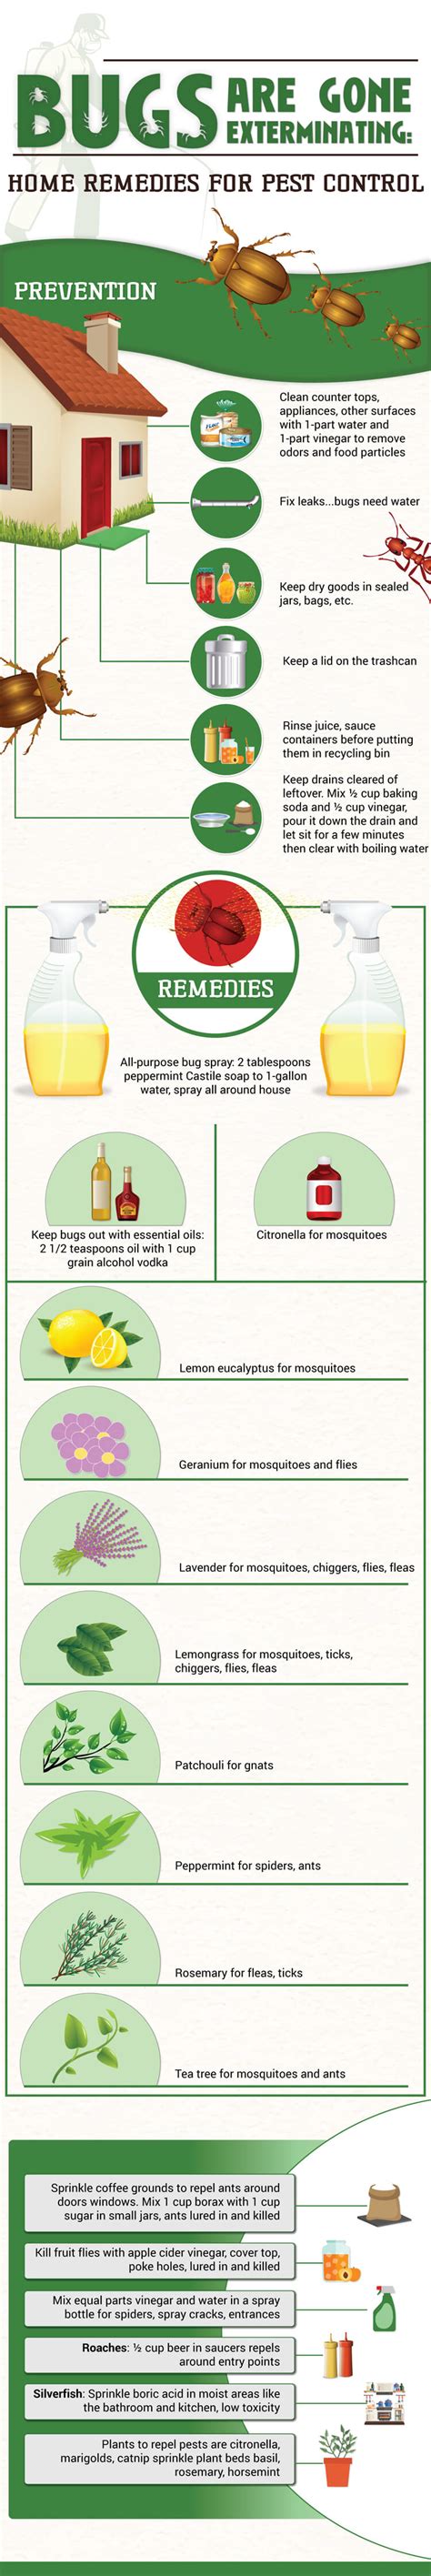 Chapter 7 protecting yourself (pesticide). 23 Do It Yourself Pest Control Tips INFOGRAPHIC